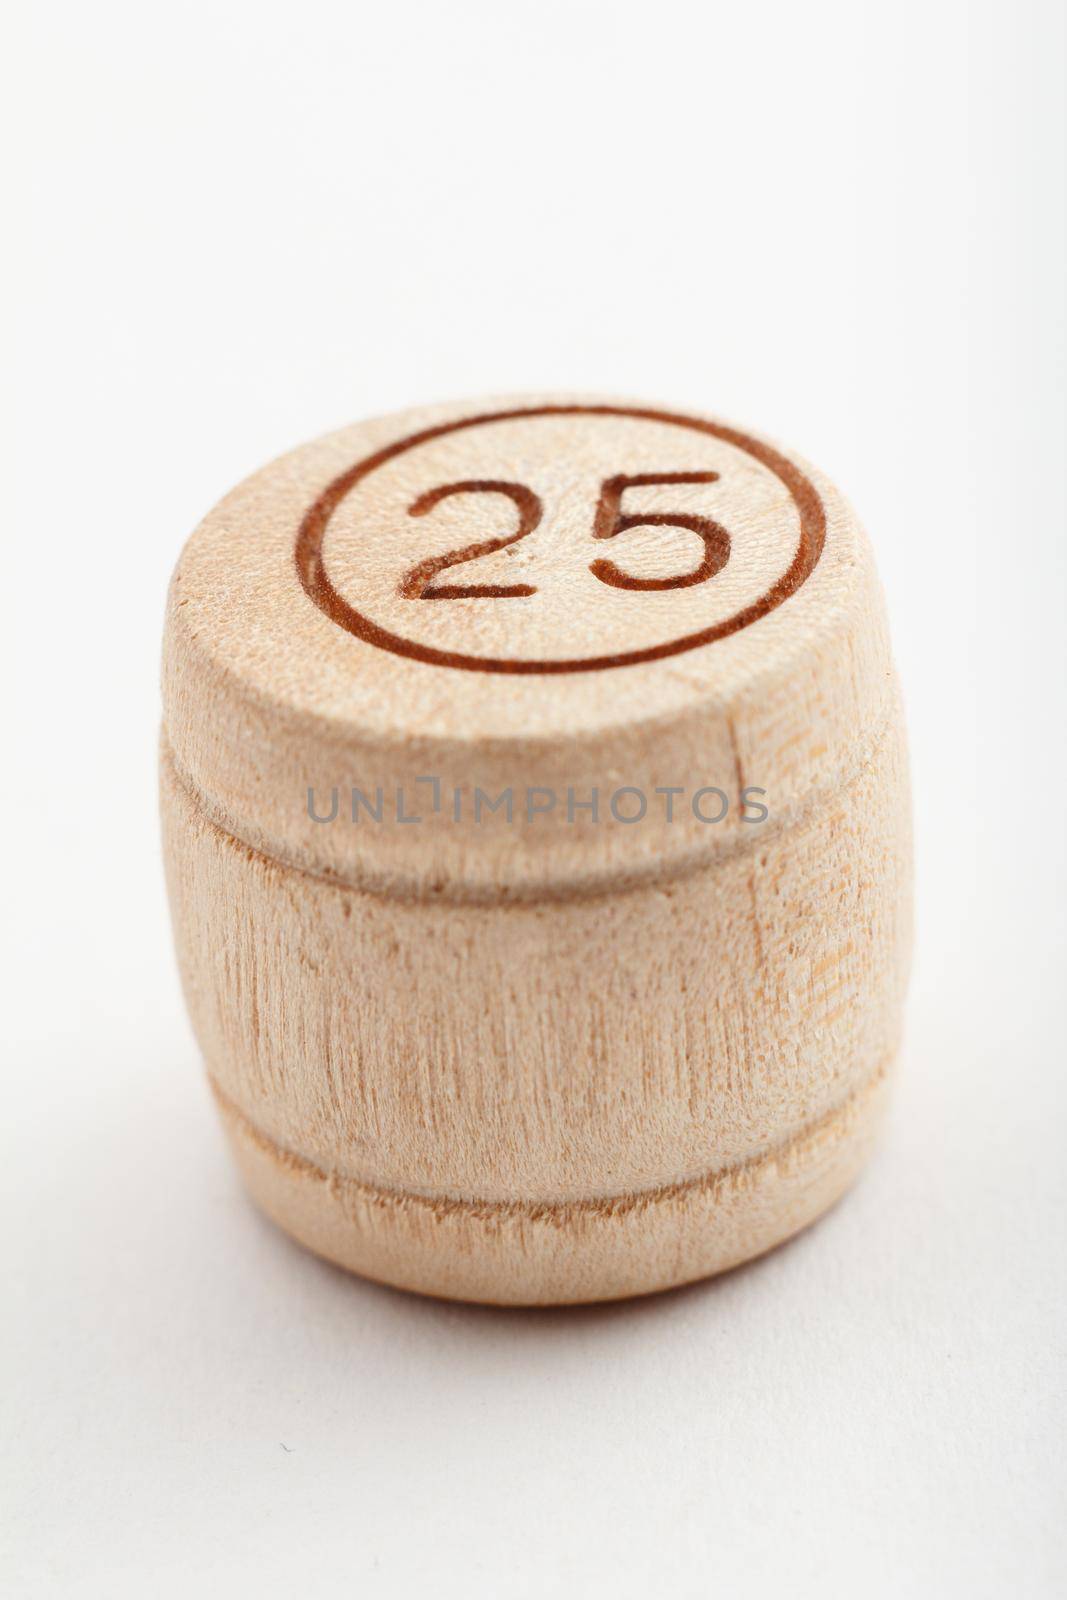 Wooden barrel number for a lotto game on a white background. Close-up view